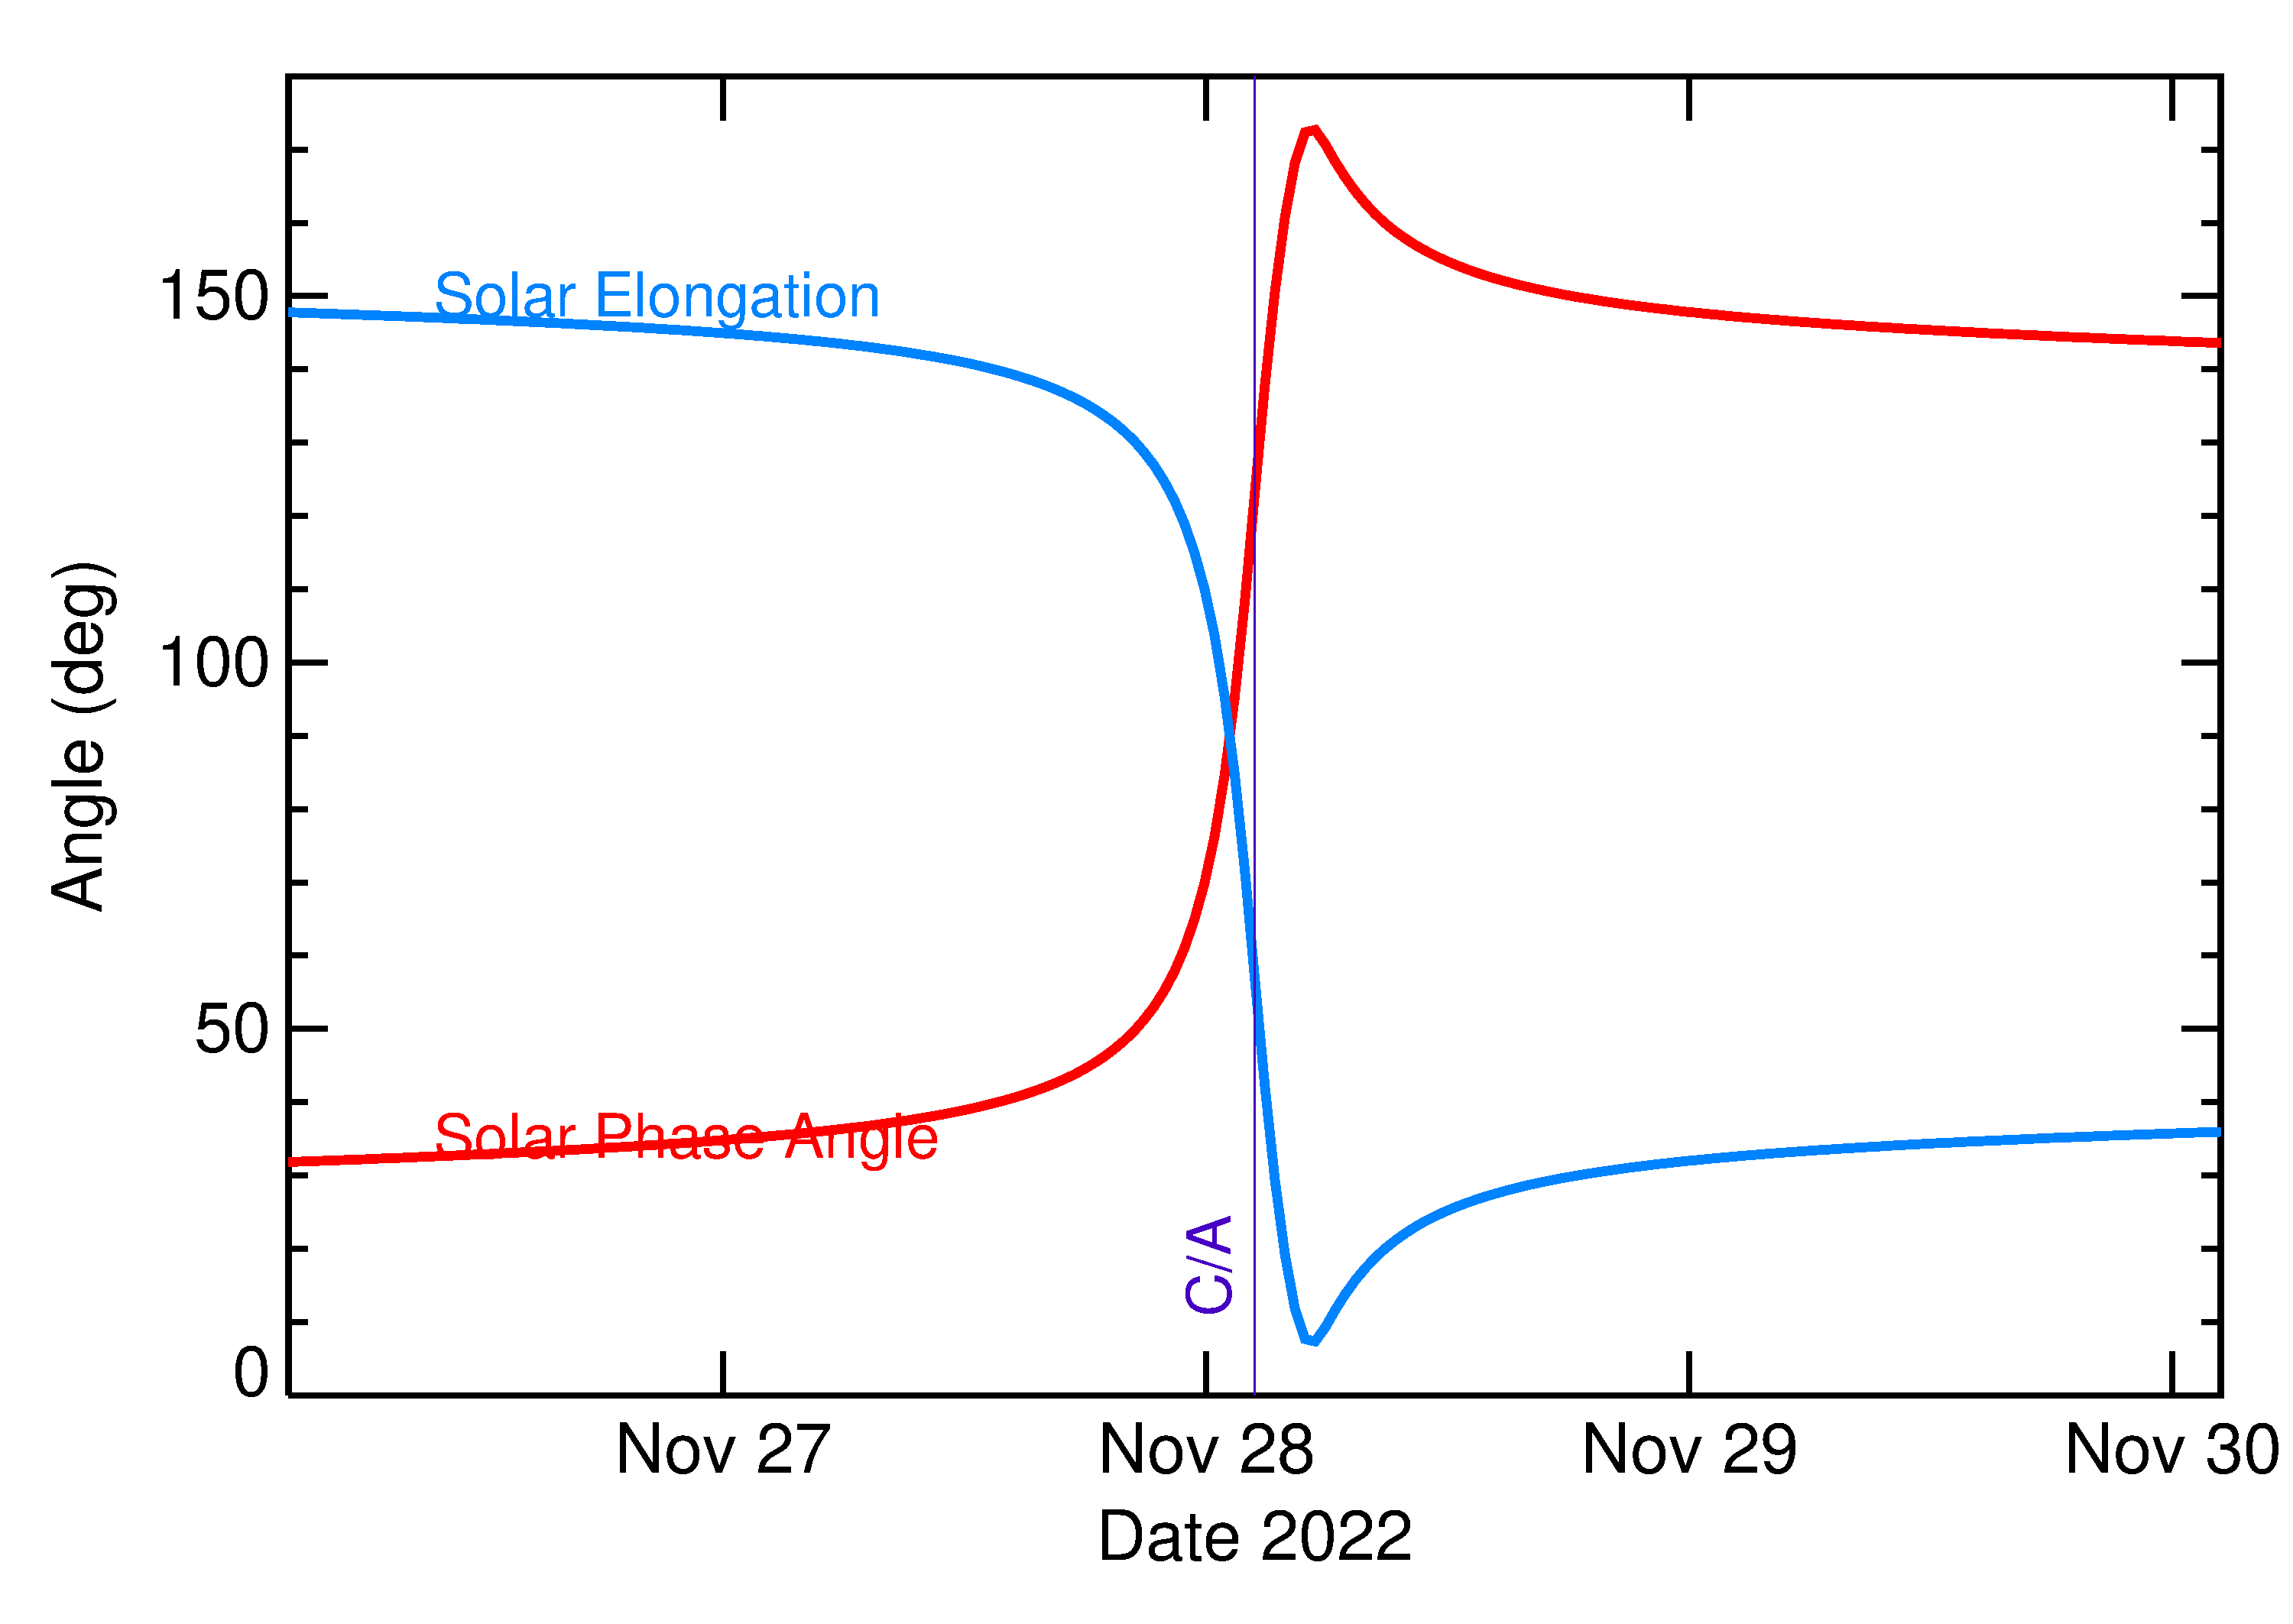 Solar Elongation and Solar Phase Angle of 2022 WM7 in the days around closest approach